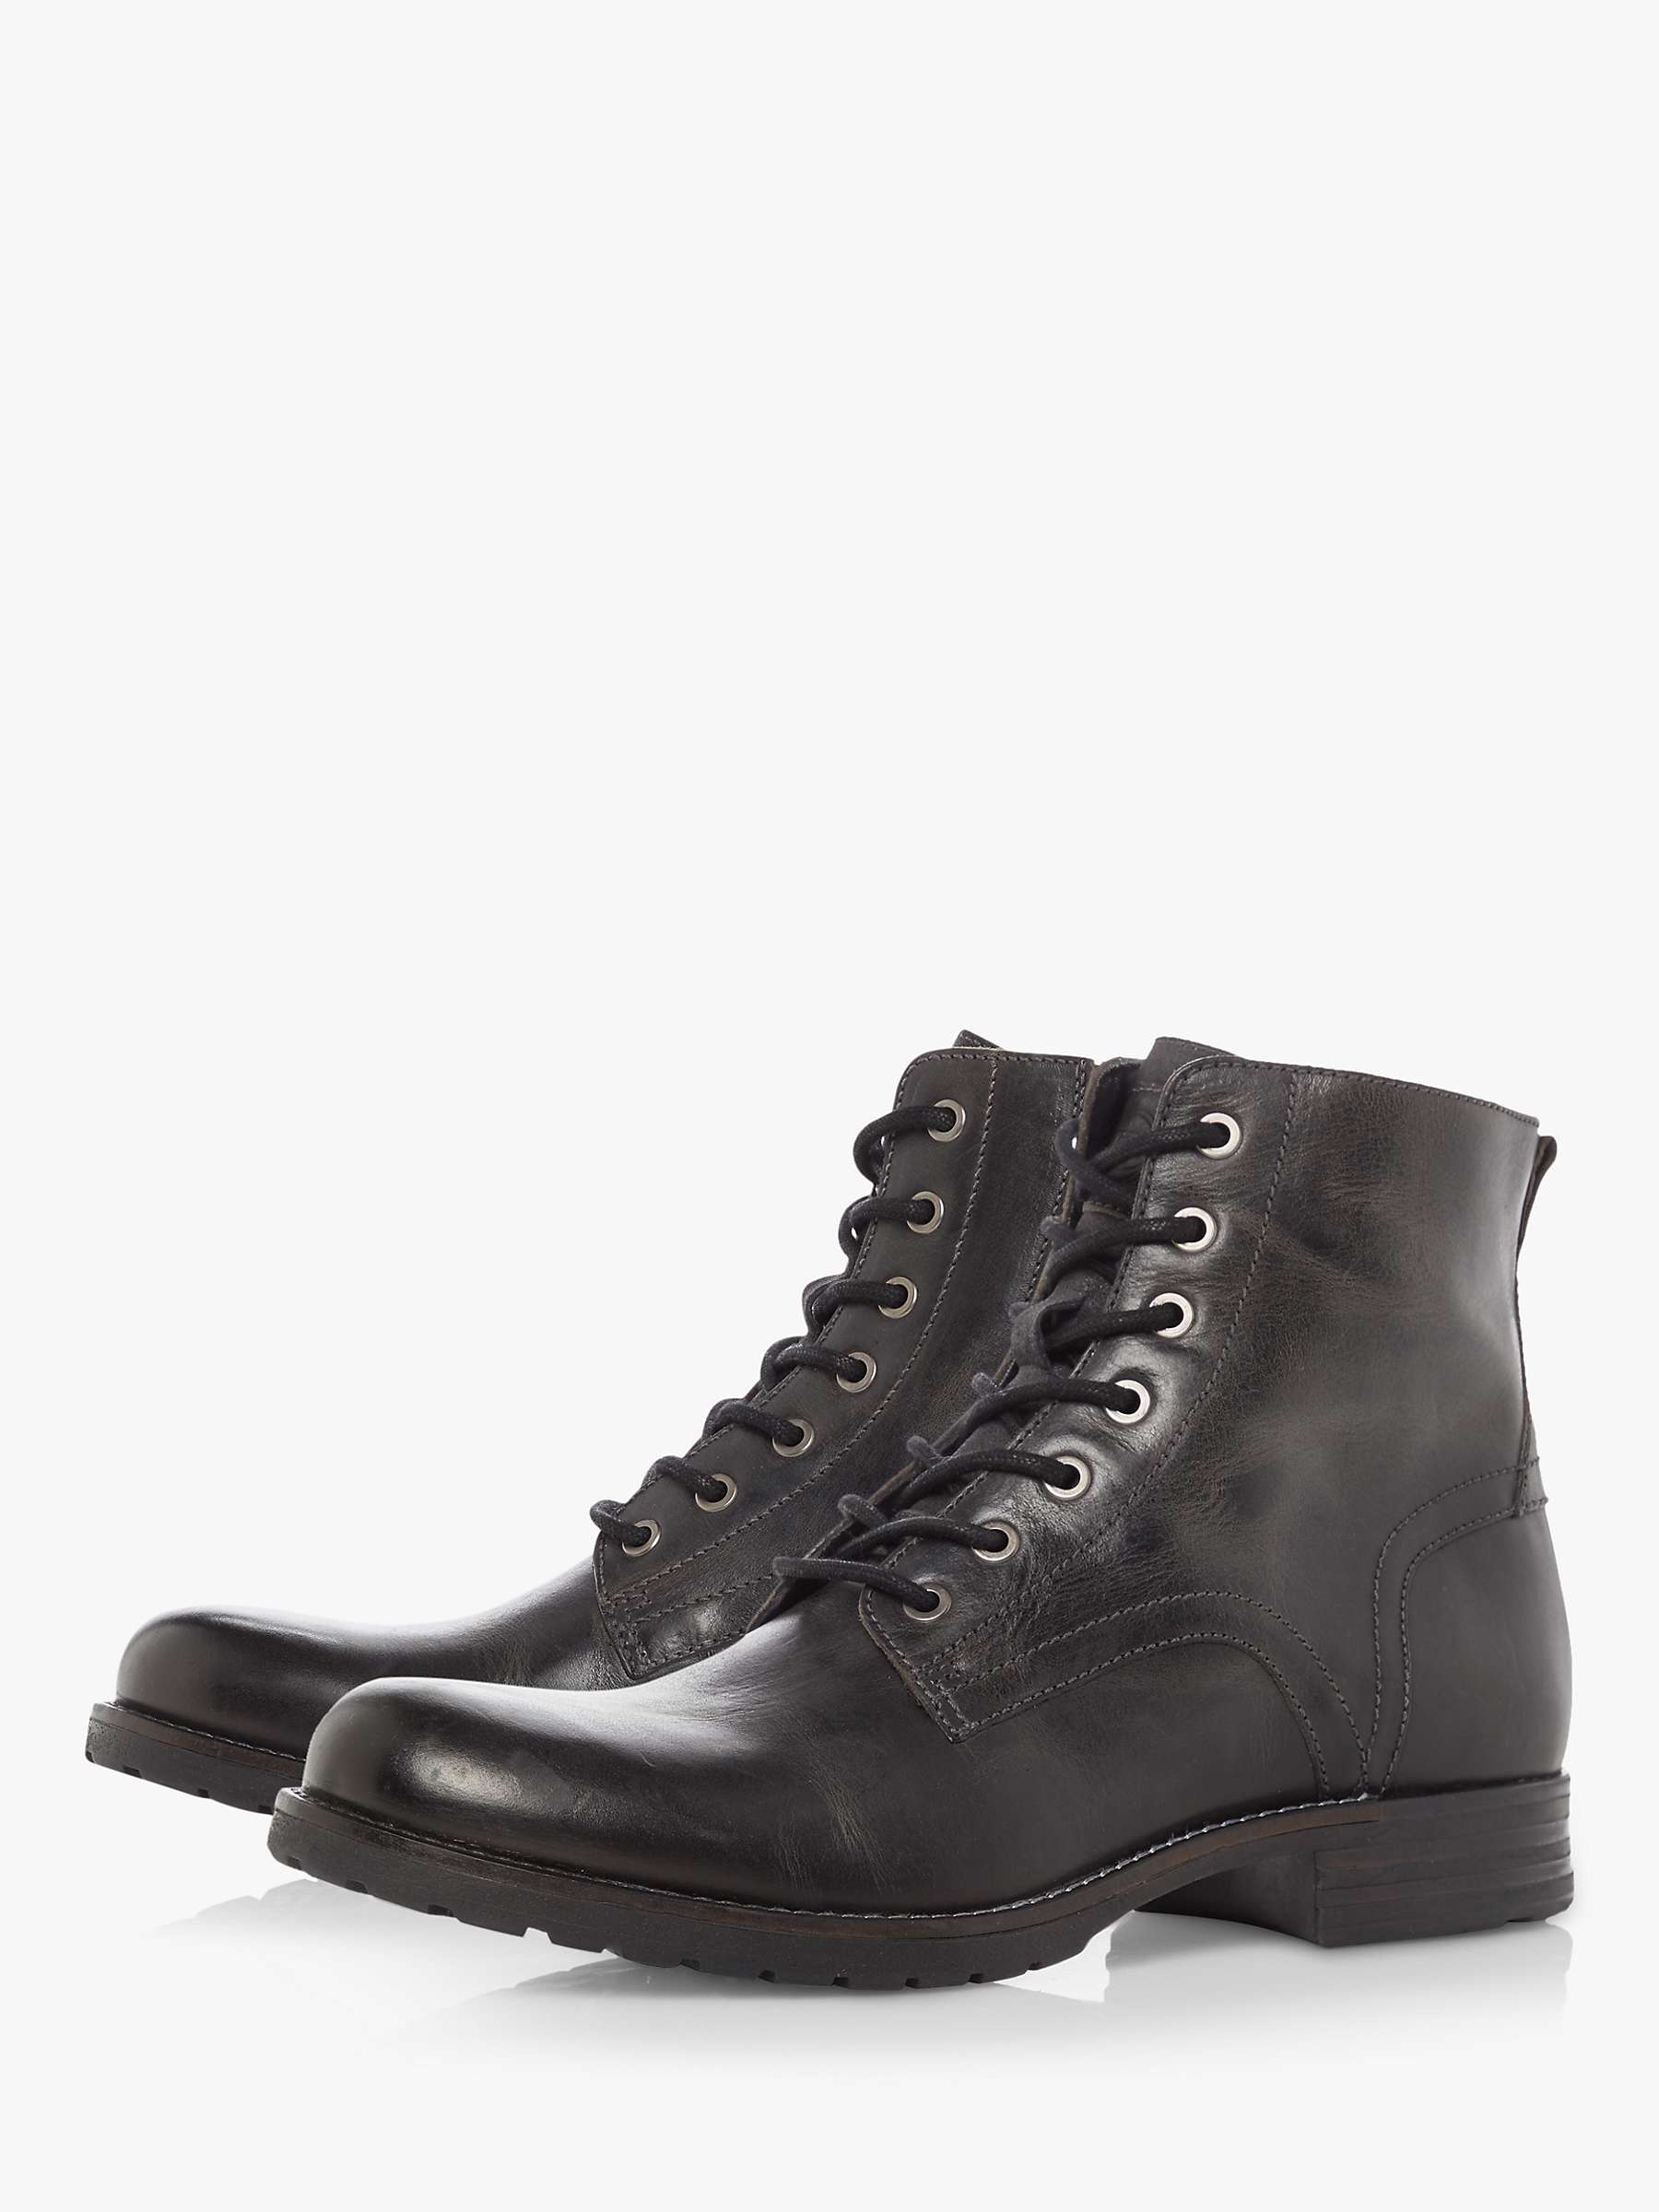 Buy Dune Cardif Leather Boots Online at johnlewis.com